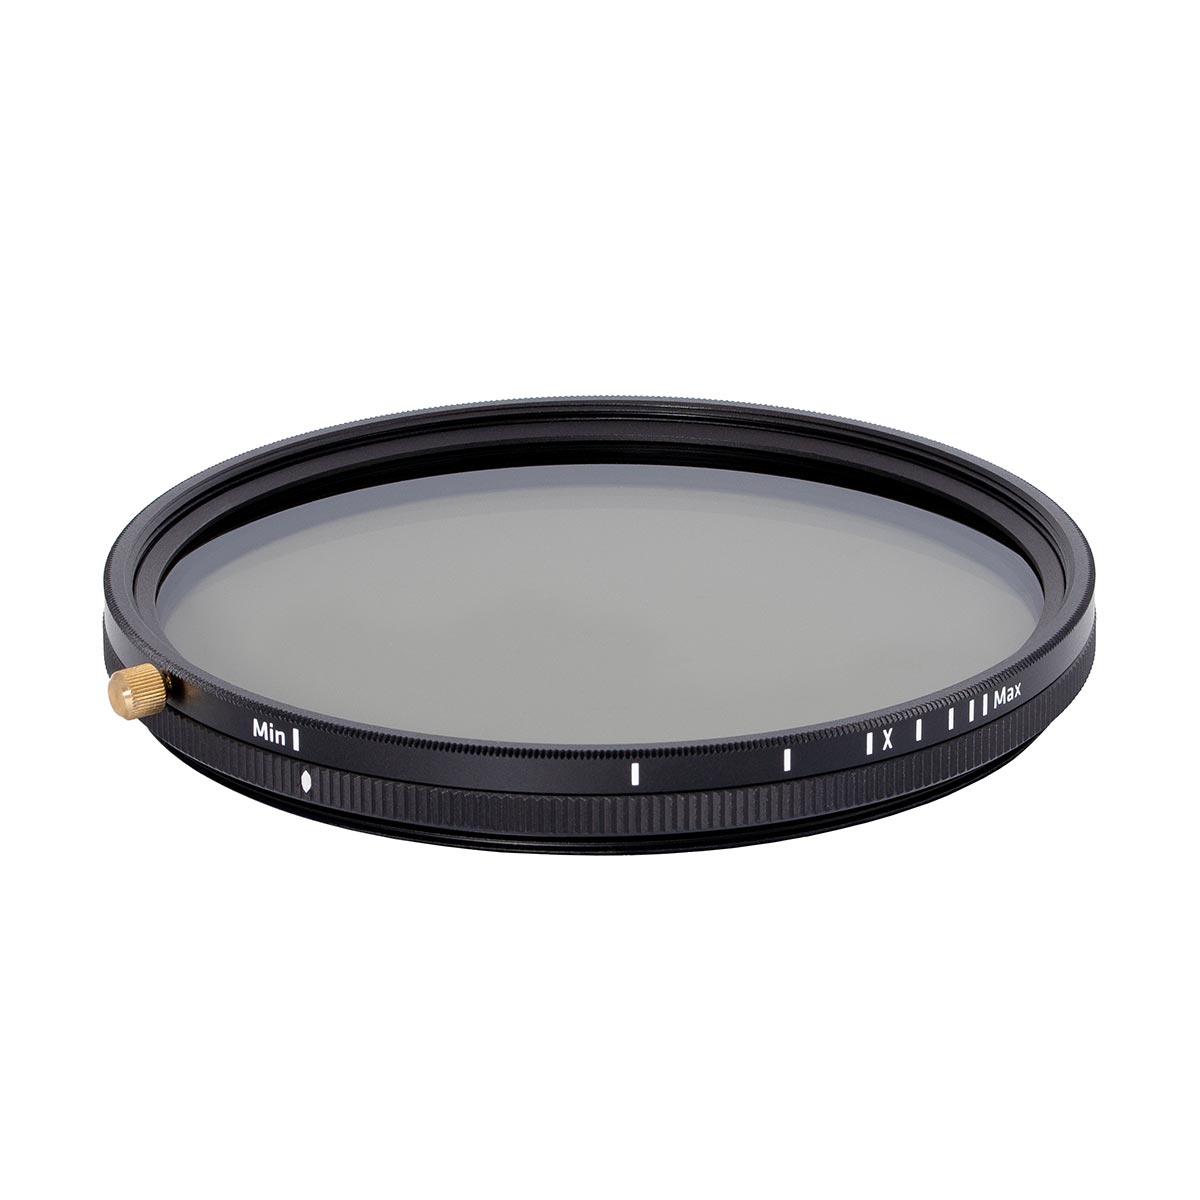 ProMaster HGX Prime 82mm Variable ND Filter (1.3 - 8 stops)